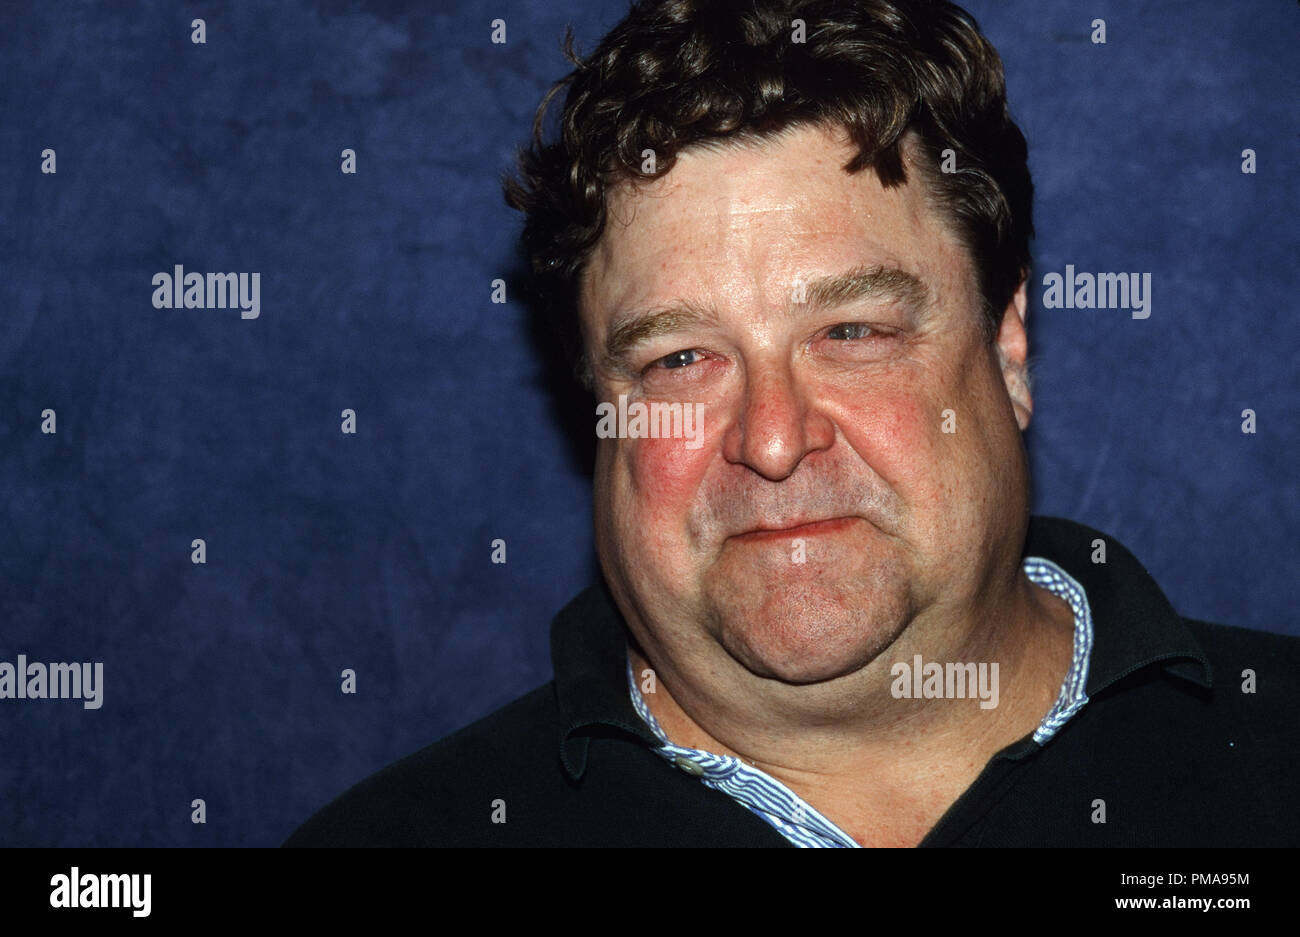 John Goodman circa 2000 © JRC /The Hollywood Archive  -  All Rights Reserved  File Reference # 31955 798JRC Stock Photo